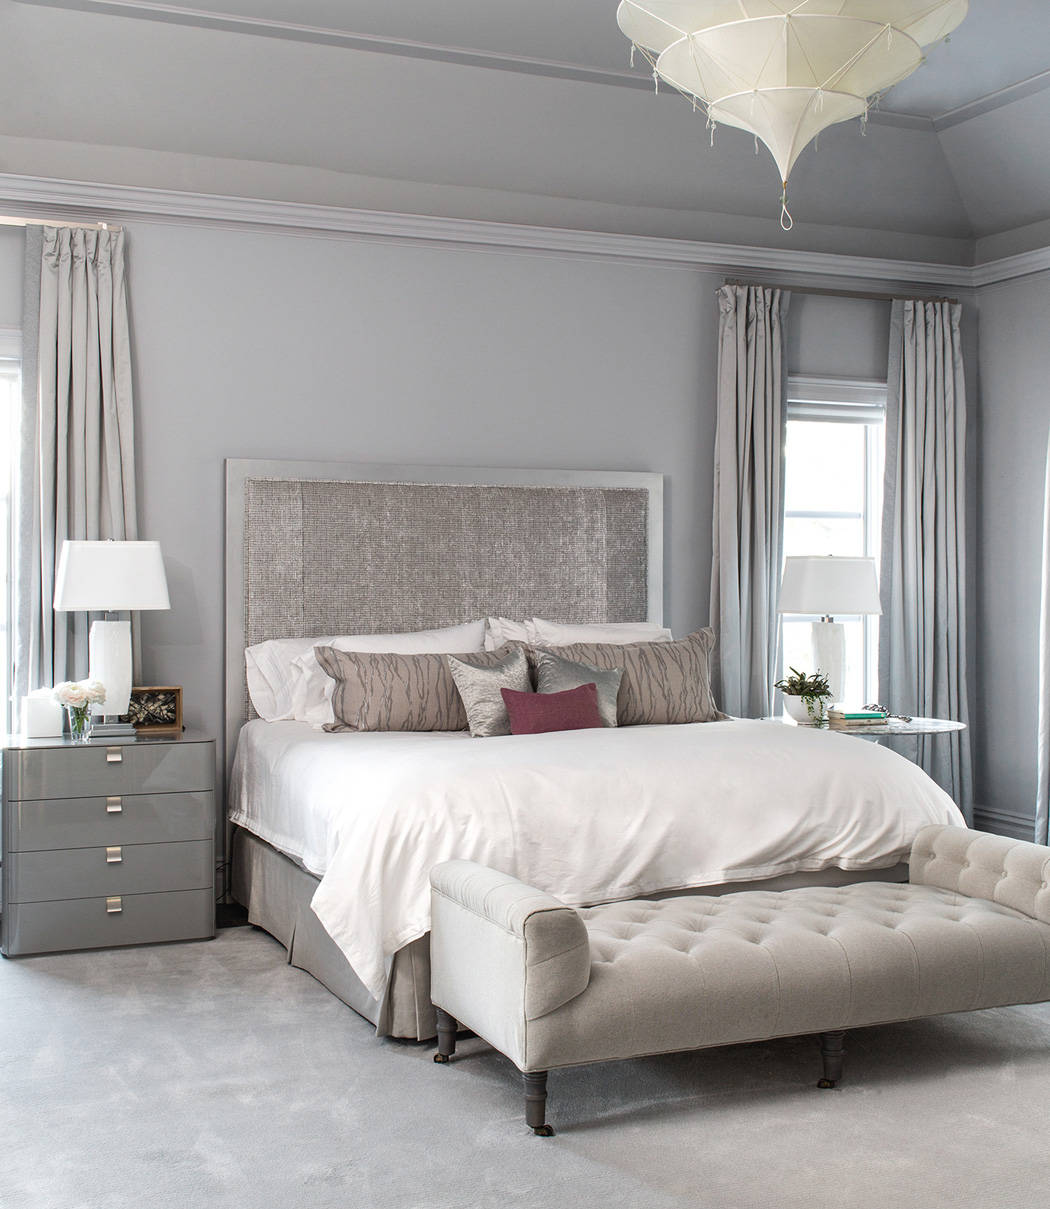 Curtains With Gray Walls Ideas Photos, What Colour Curtains For Grey Room